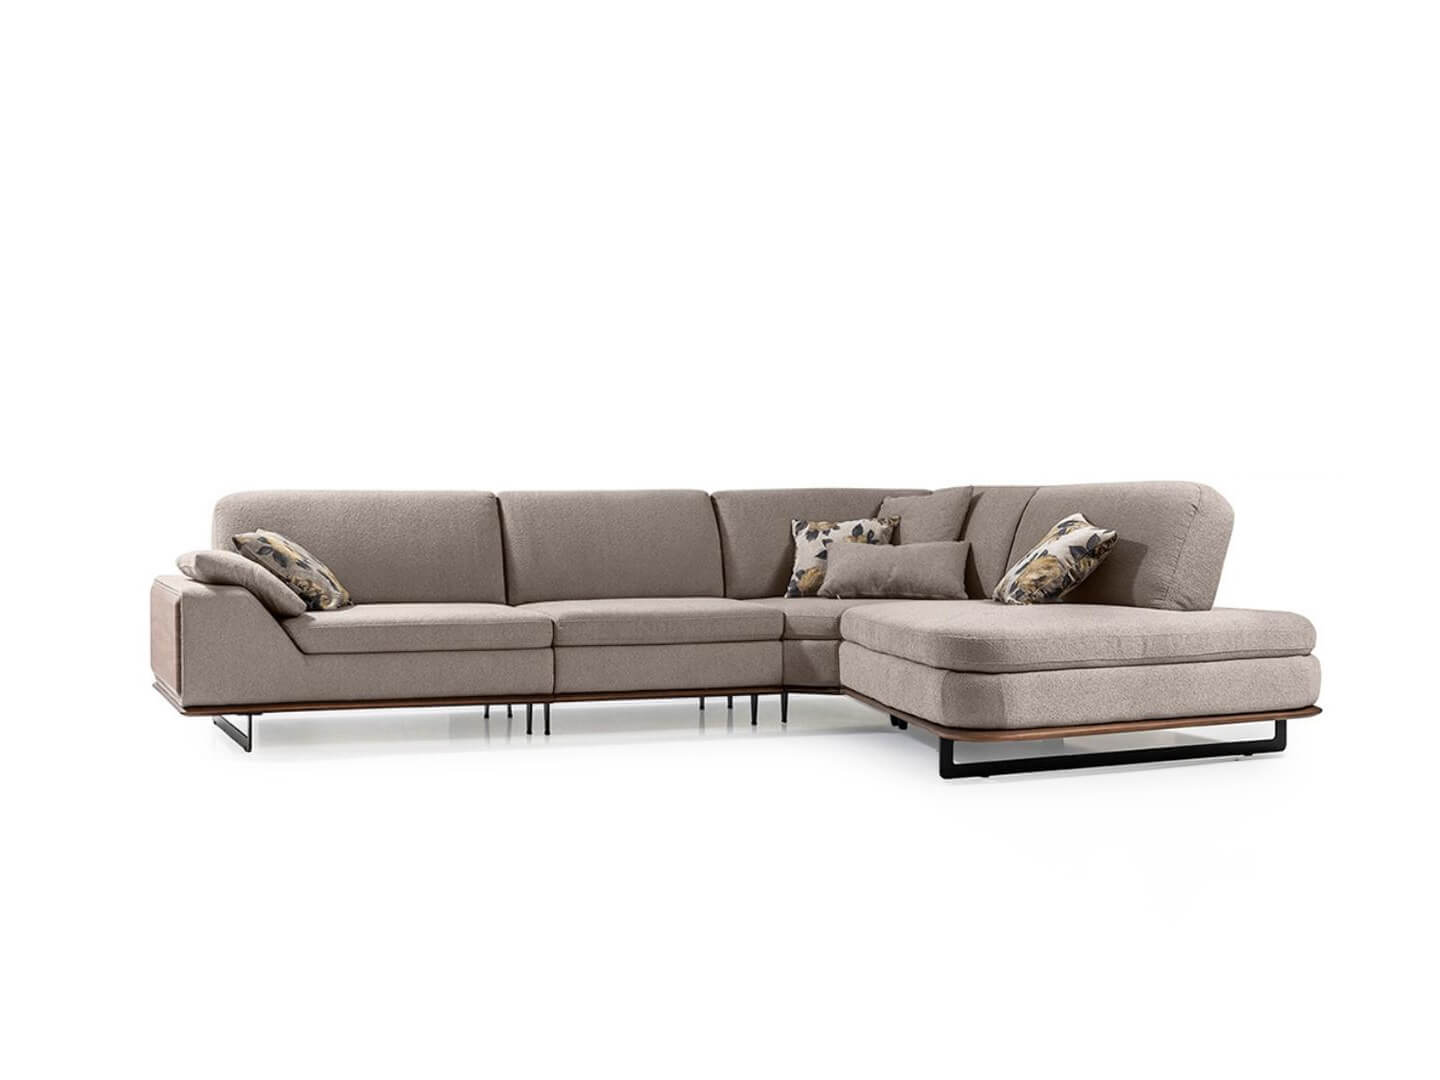 LARGE SECTIONAL SOFA BEIGE WITH MOVEABLE BACK CUSHIONS FOR MORE SEATING SPACE